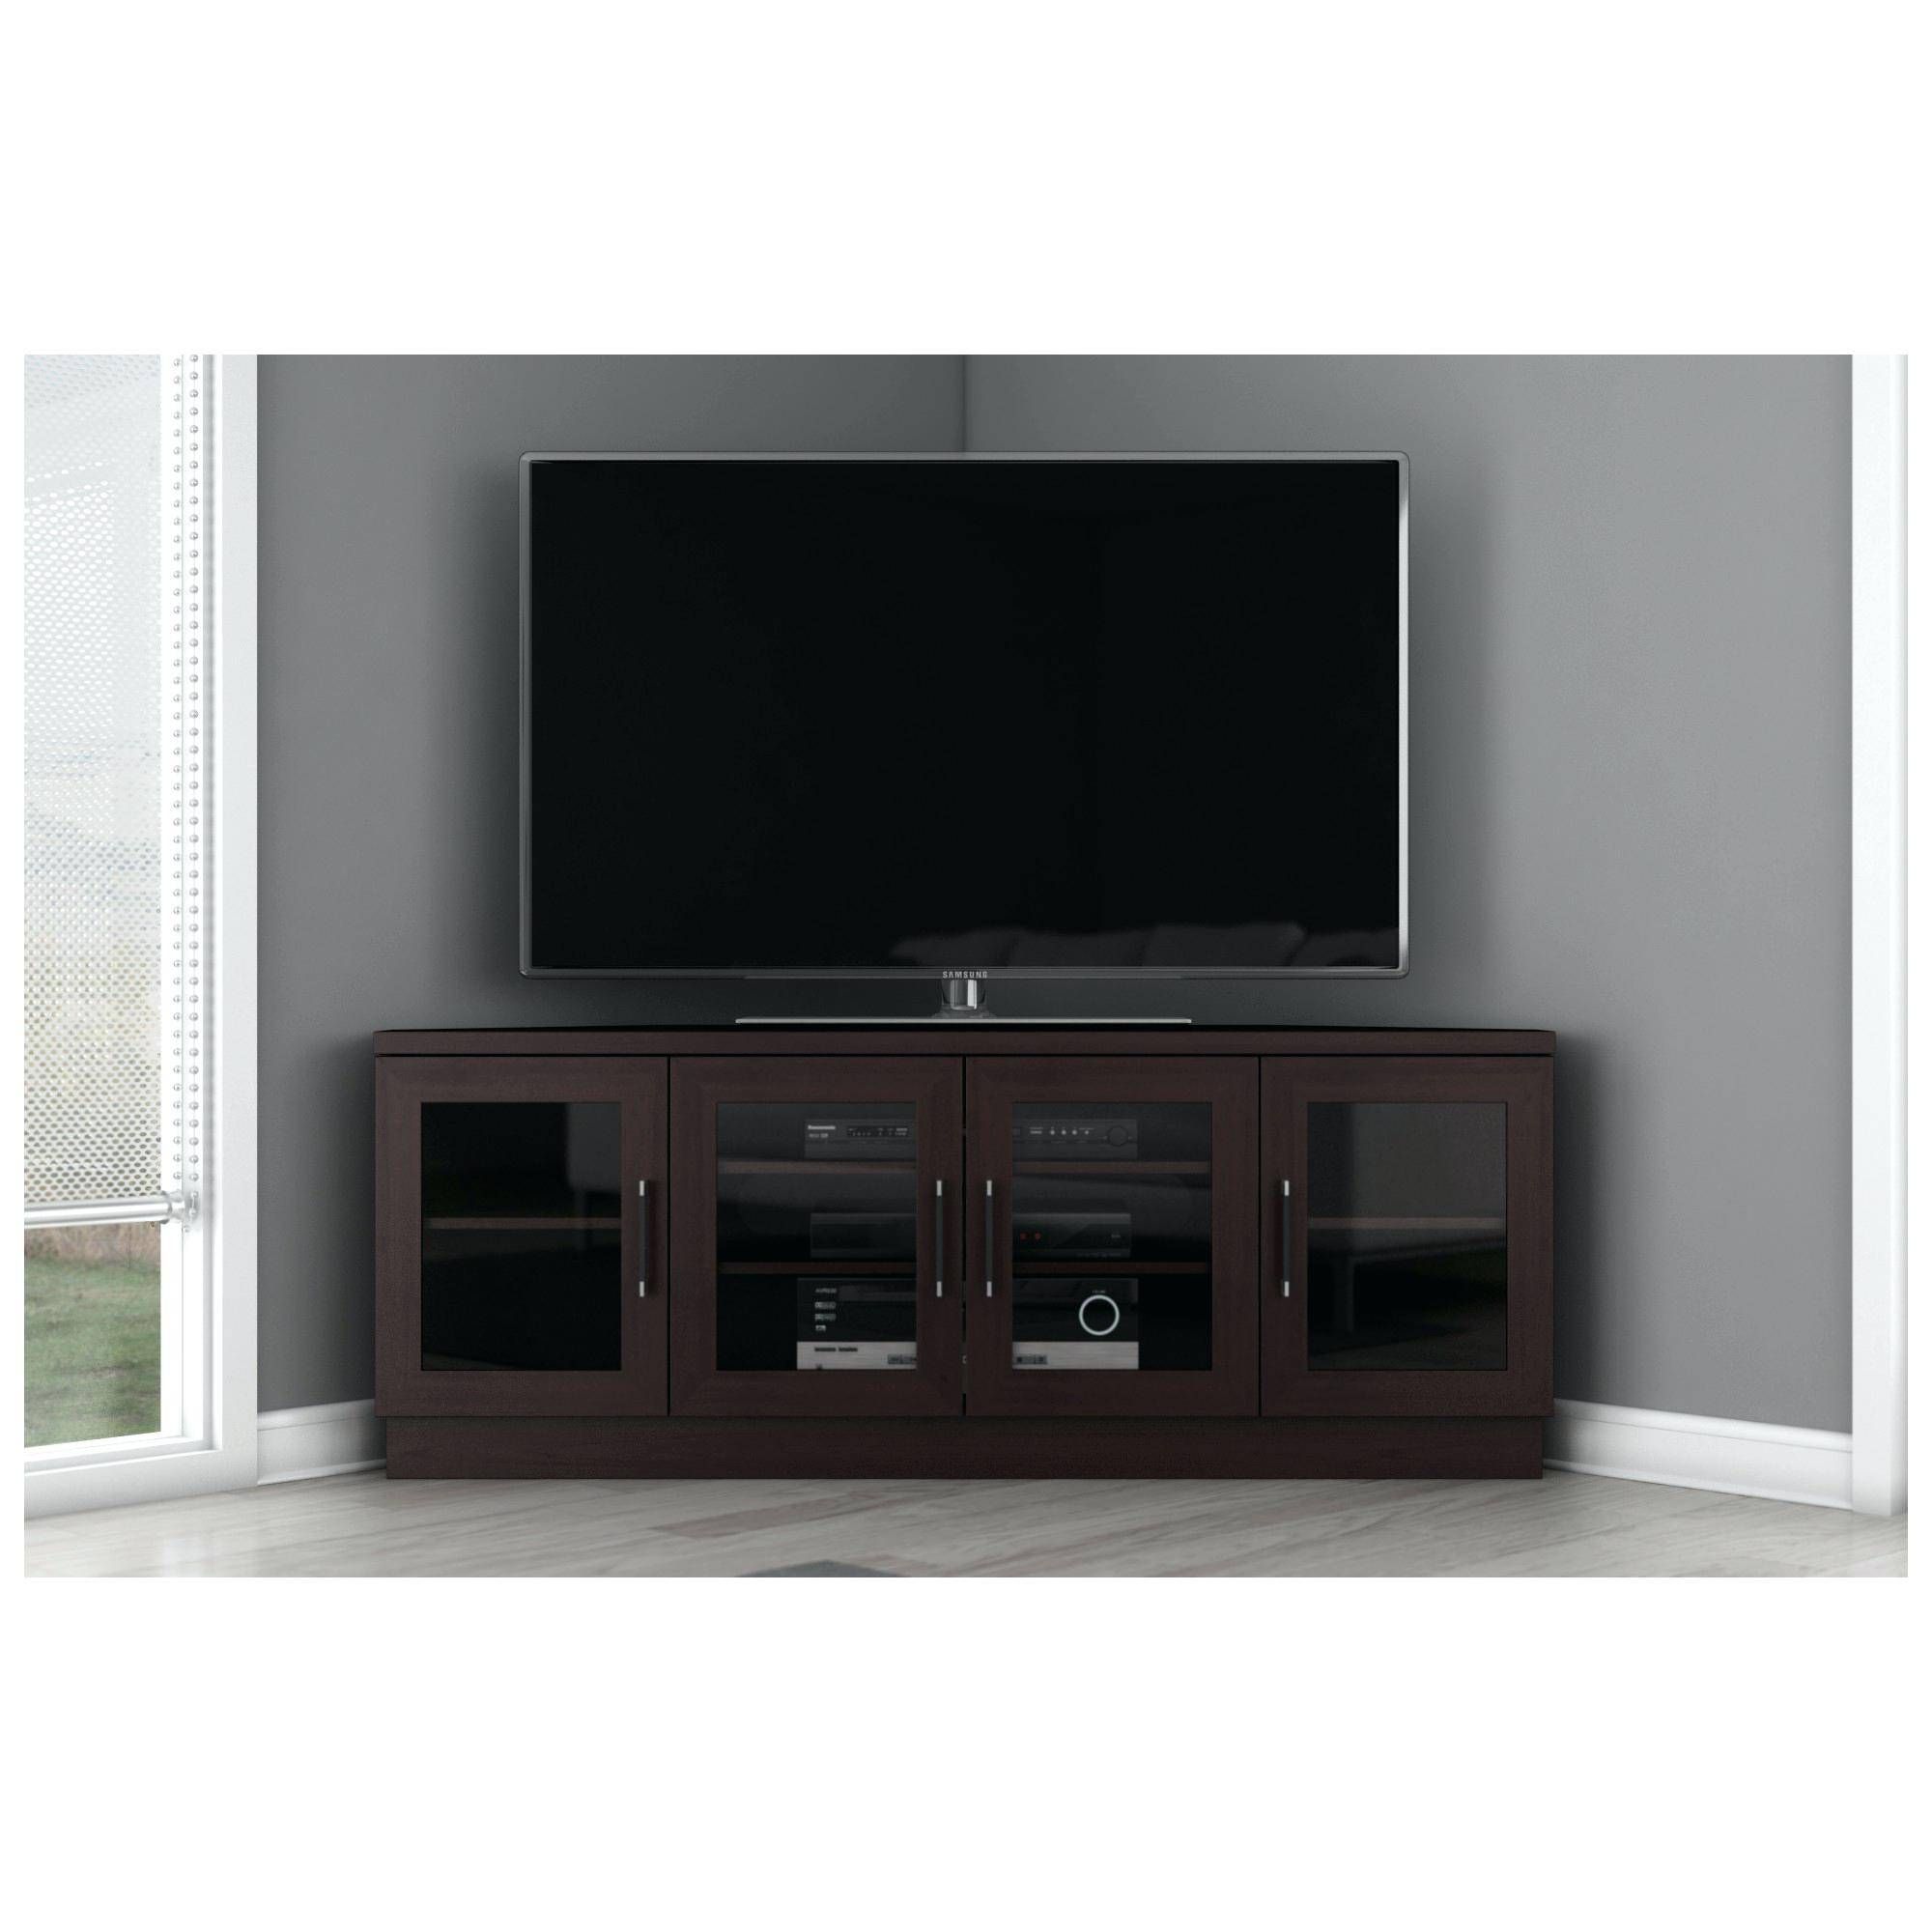 Tv Stand : 131 Black Corner Tv Stand For 60 Inch Tv Wonderful Pertaining To Corner 60 Inch Tv Stands (View 6 of 15)